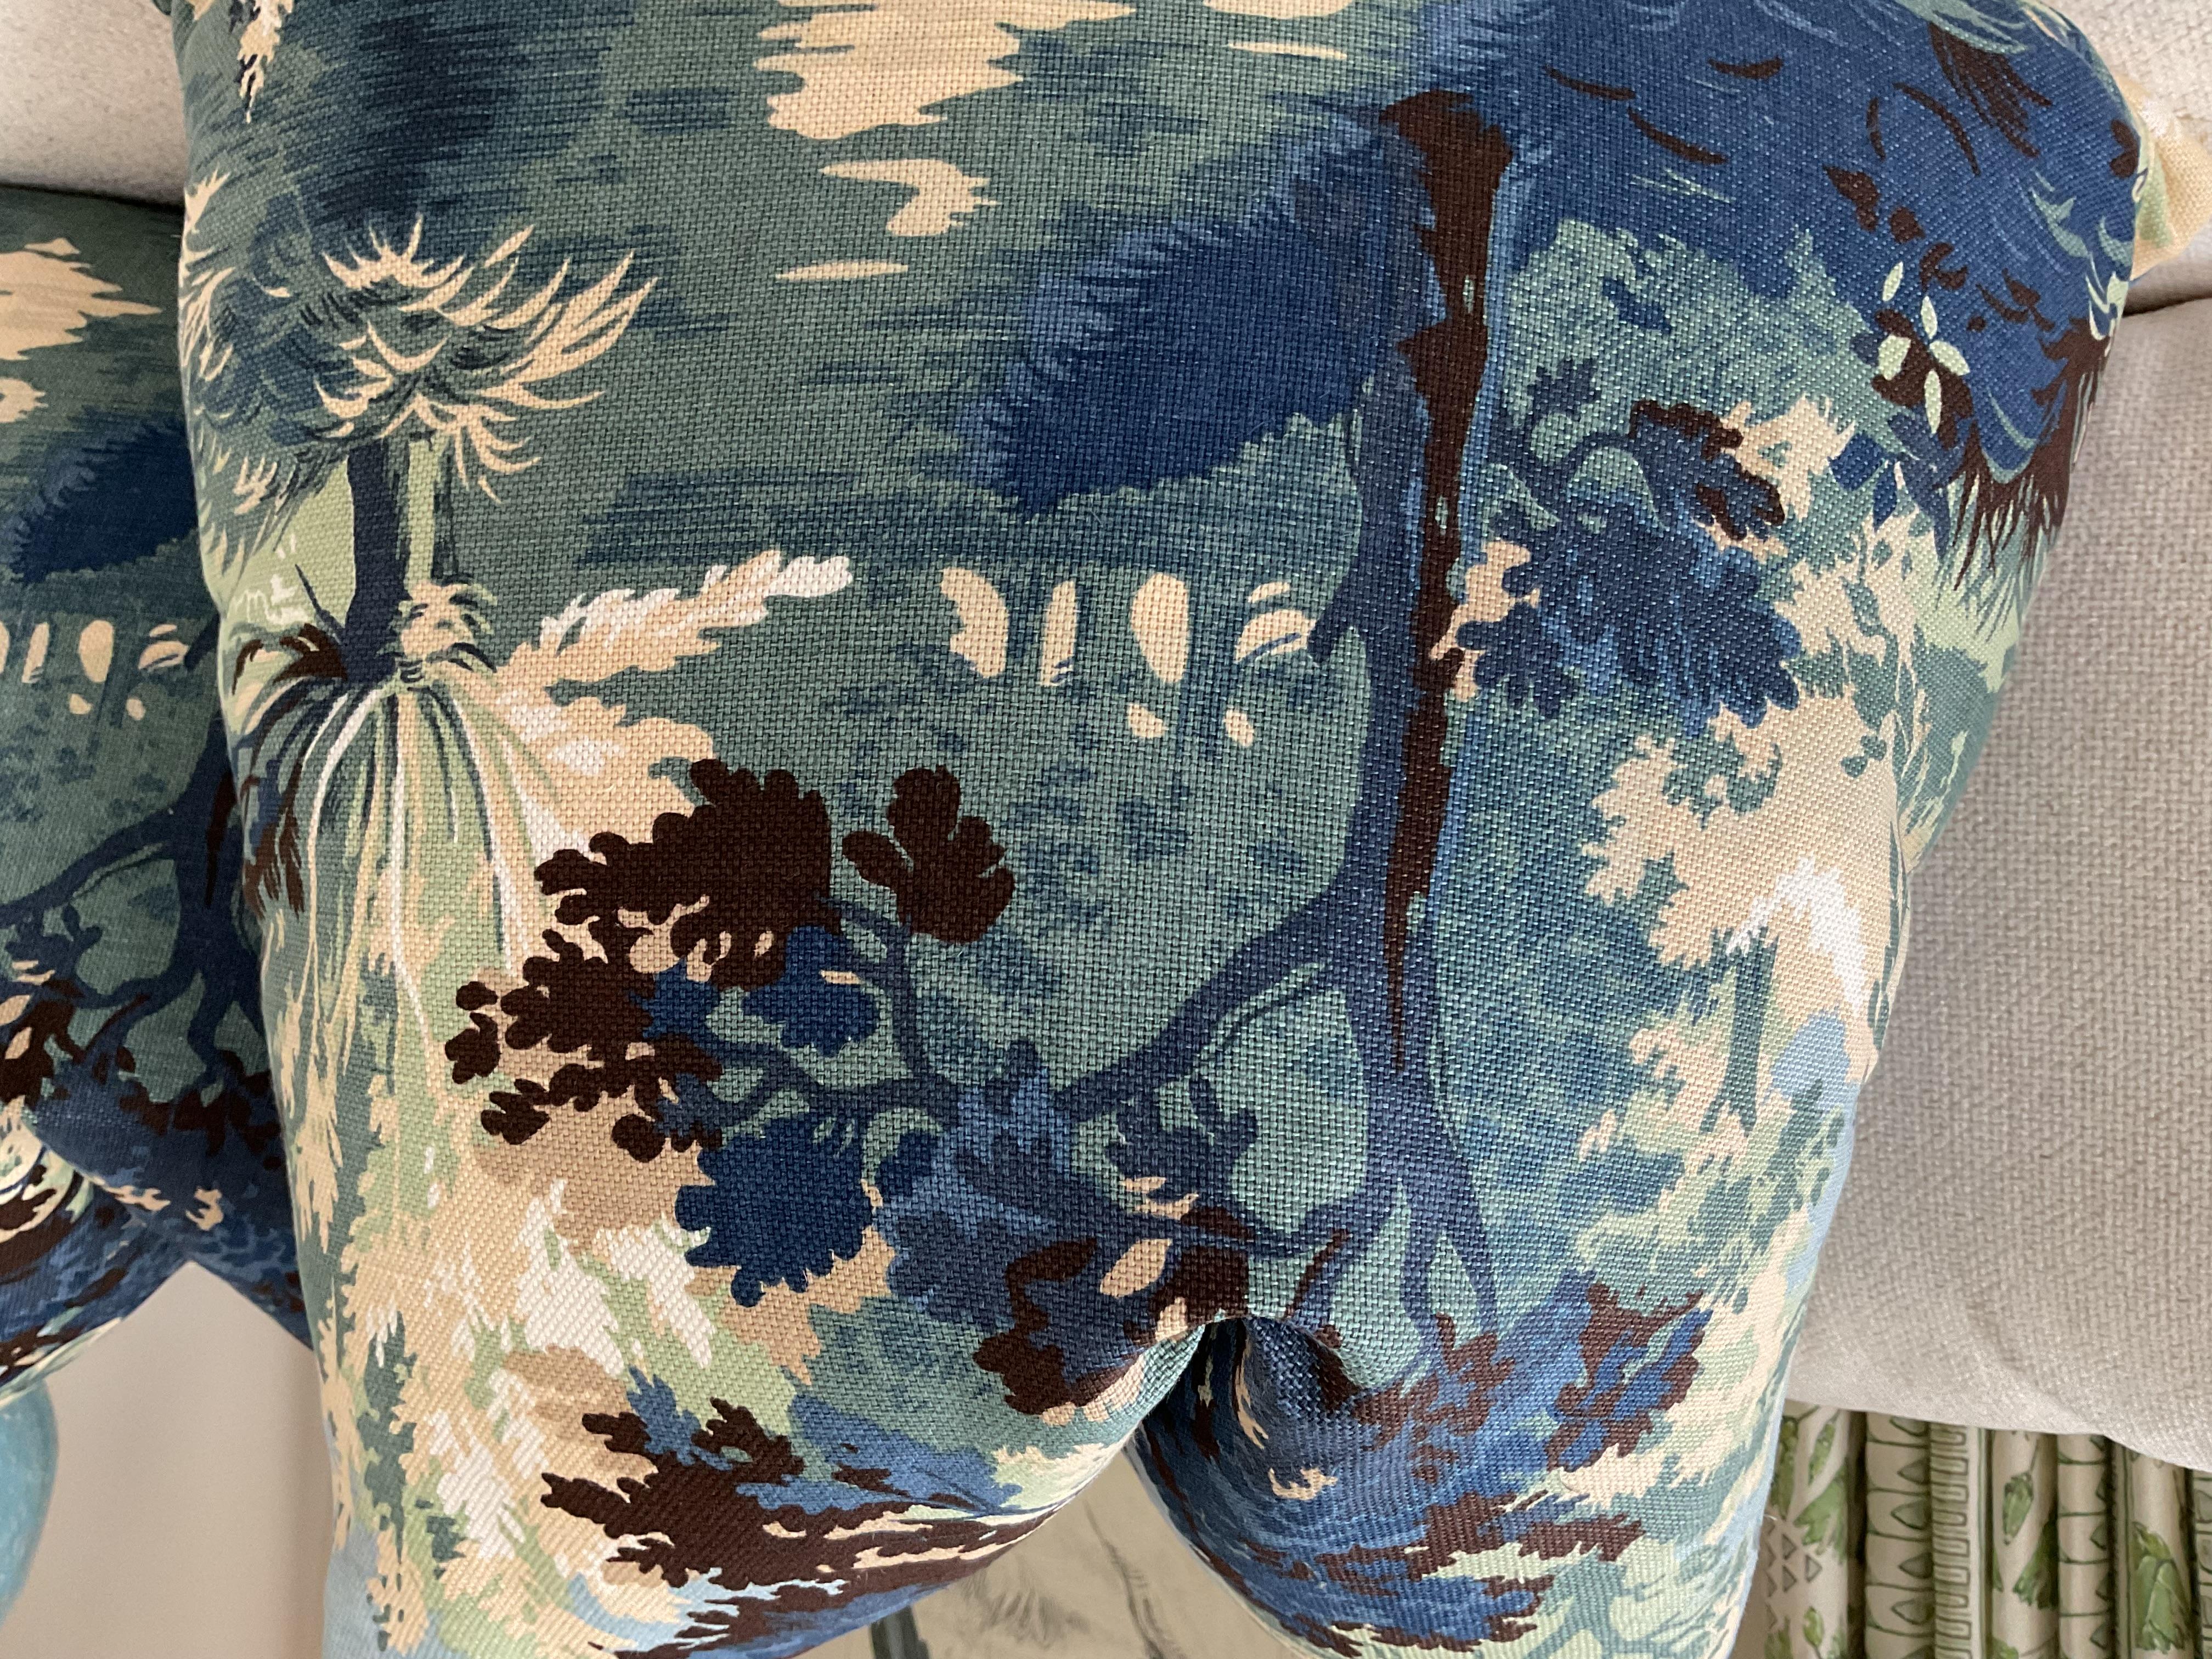 Stunning antique look toile. Depicts countryside settings with lush branches, grasses and greenery combined to create a timeless appeal….Gosh I love this pattern! Lots to coordinate here.
These will come with the Lincoln Toile on the front and a